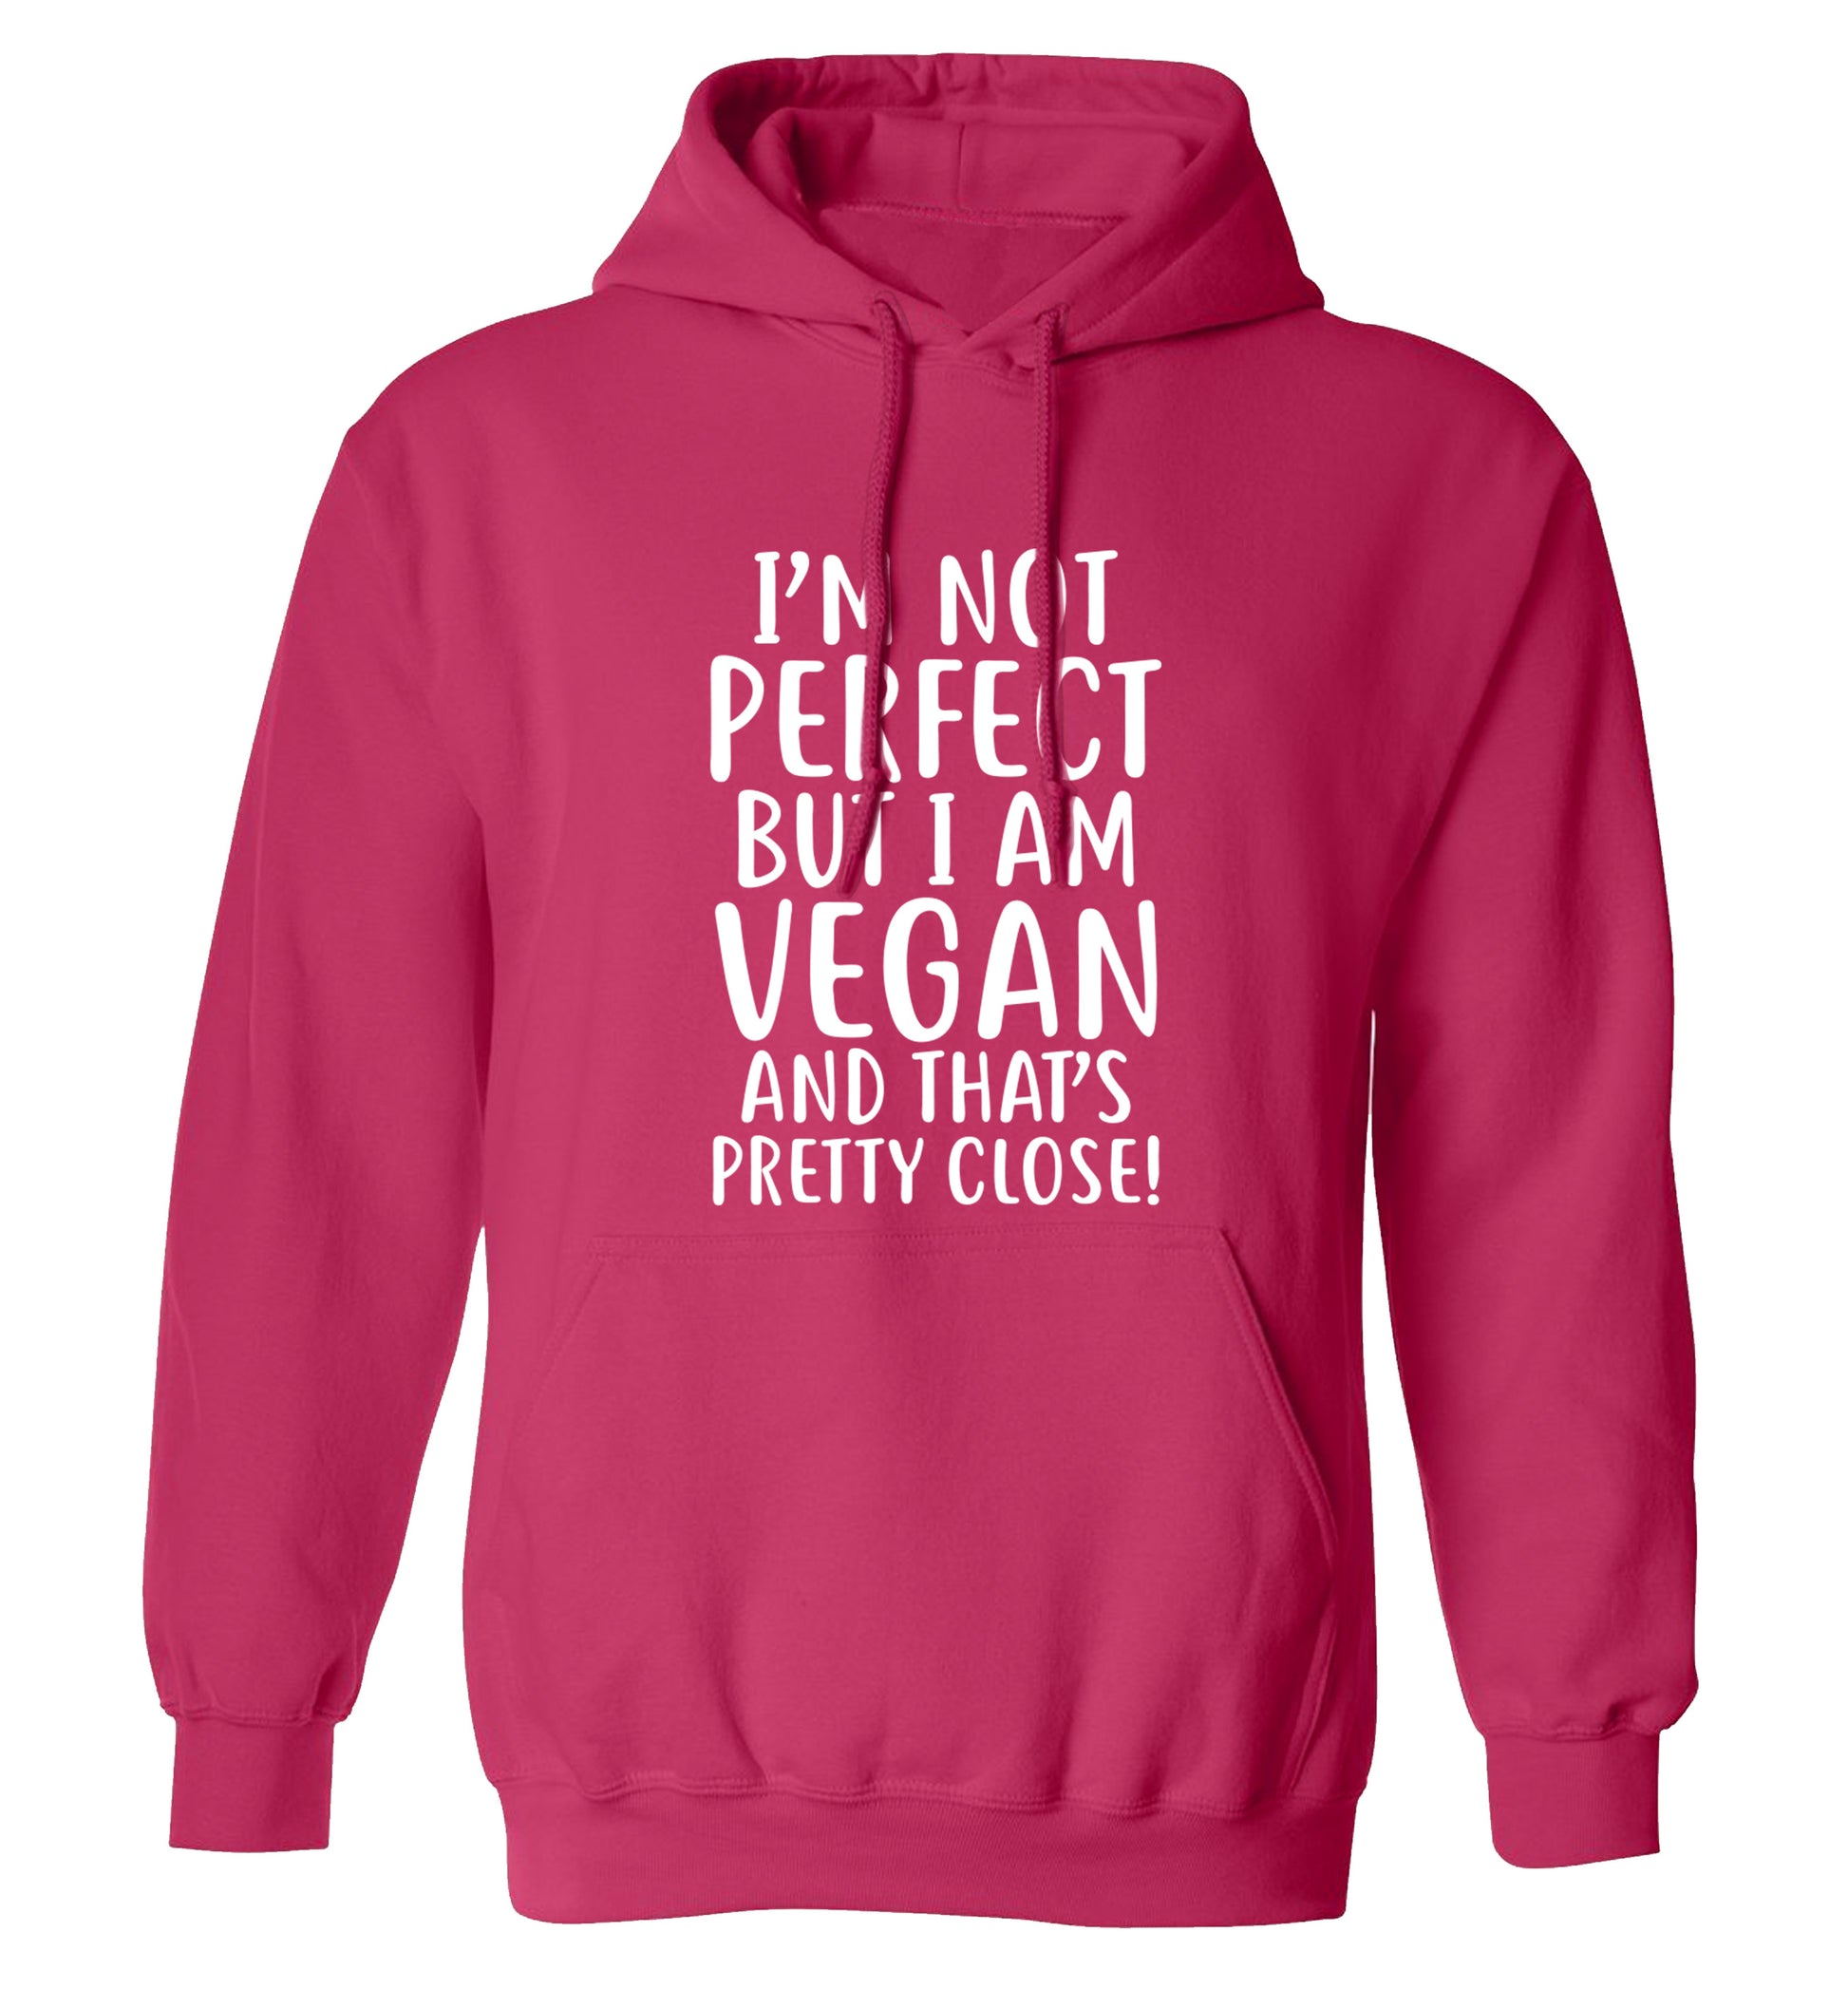 Might not be perfect but I am vegan adults unisex pink hoodie 2XL